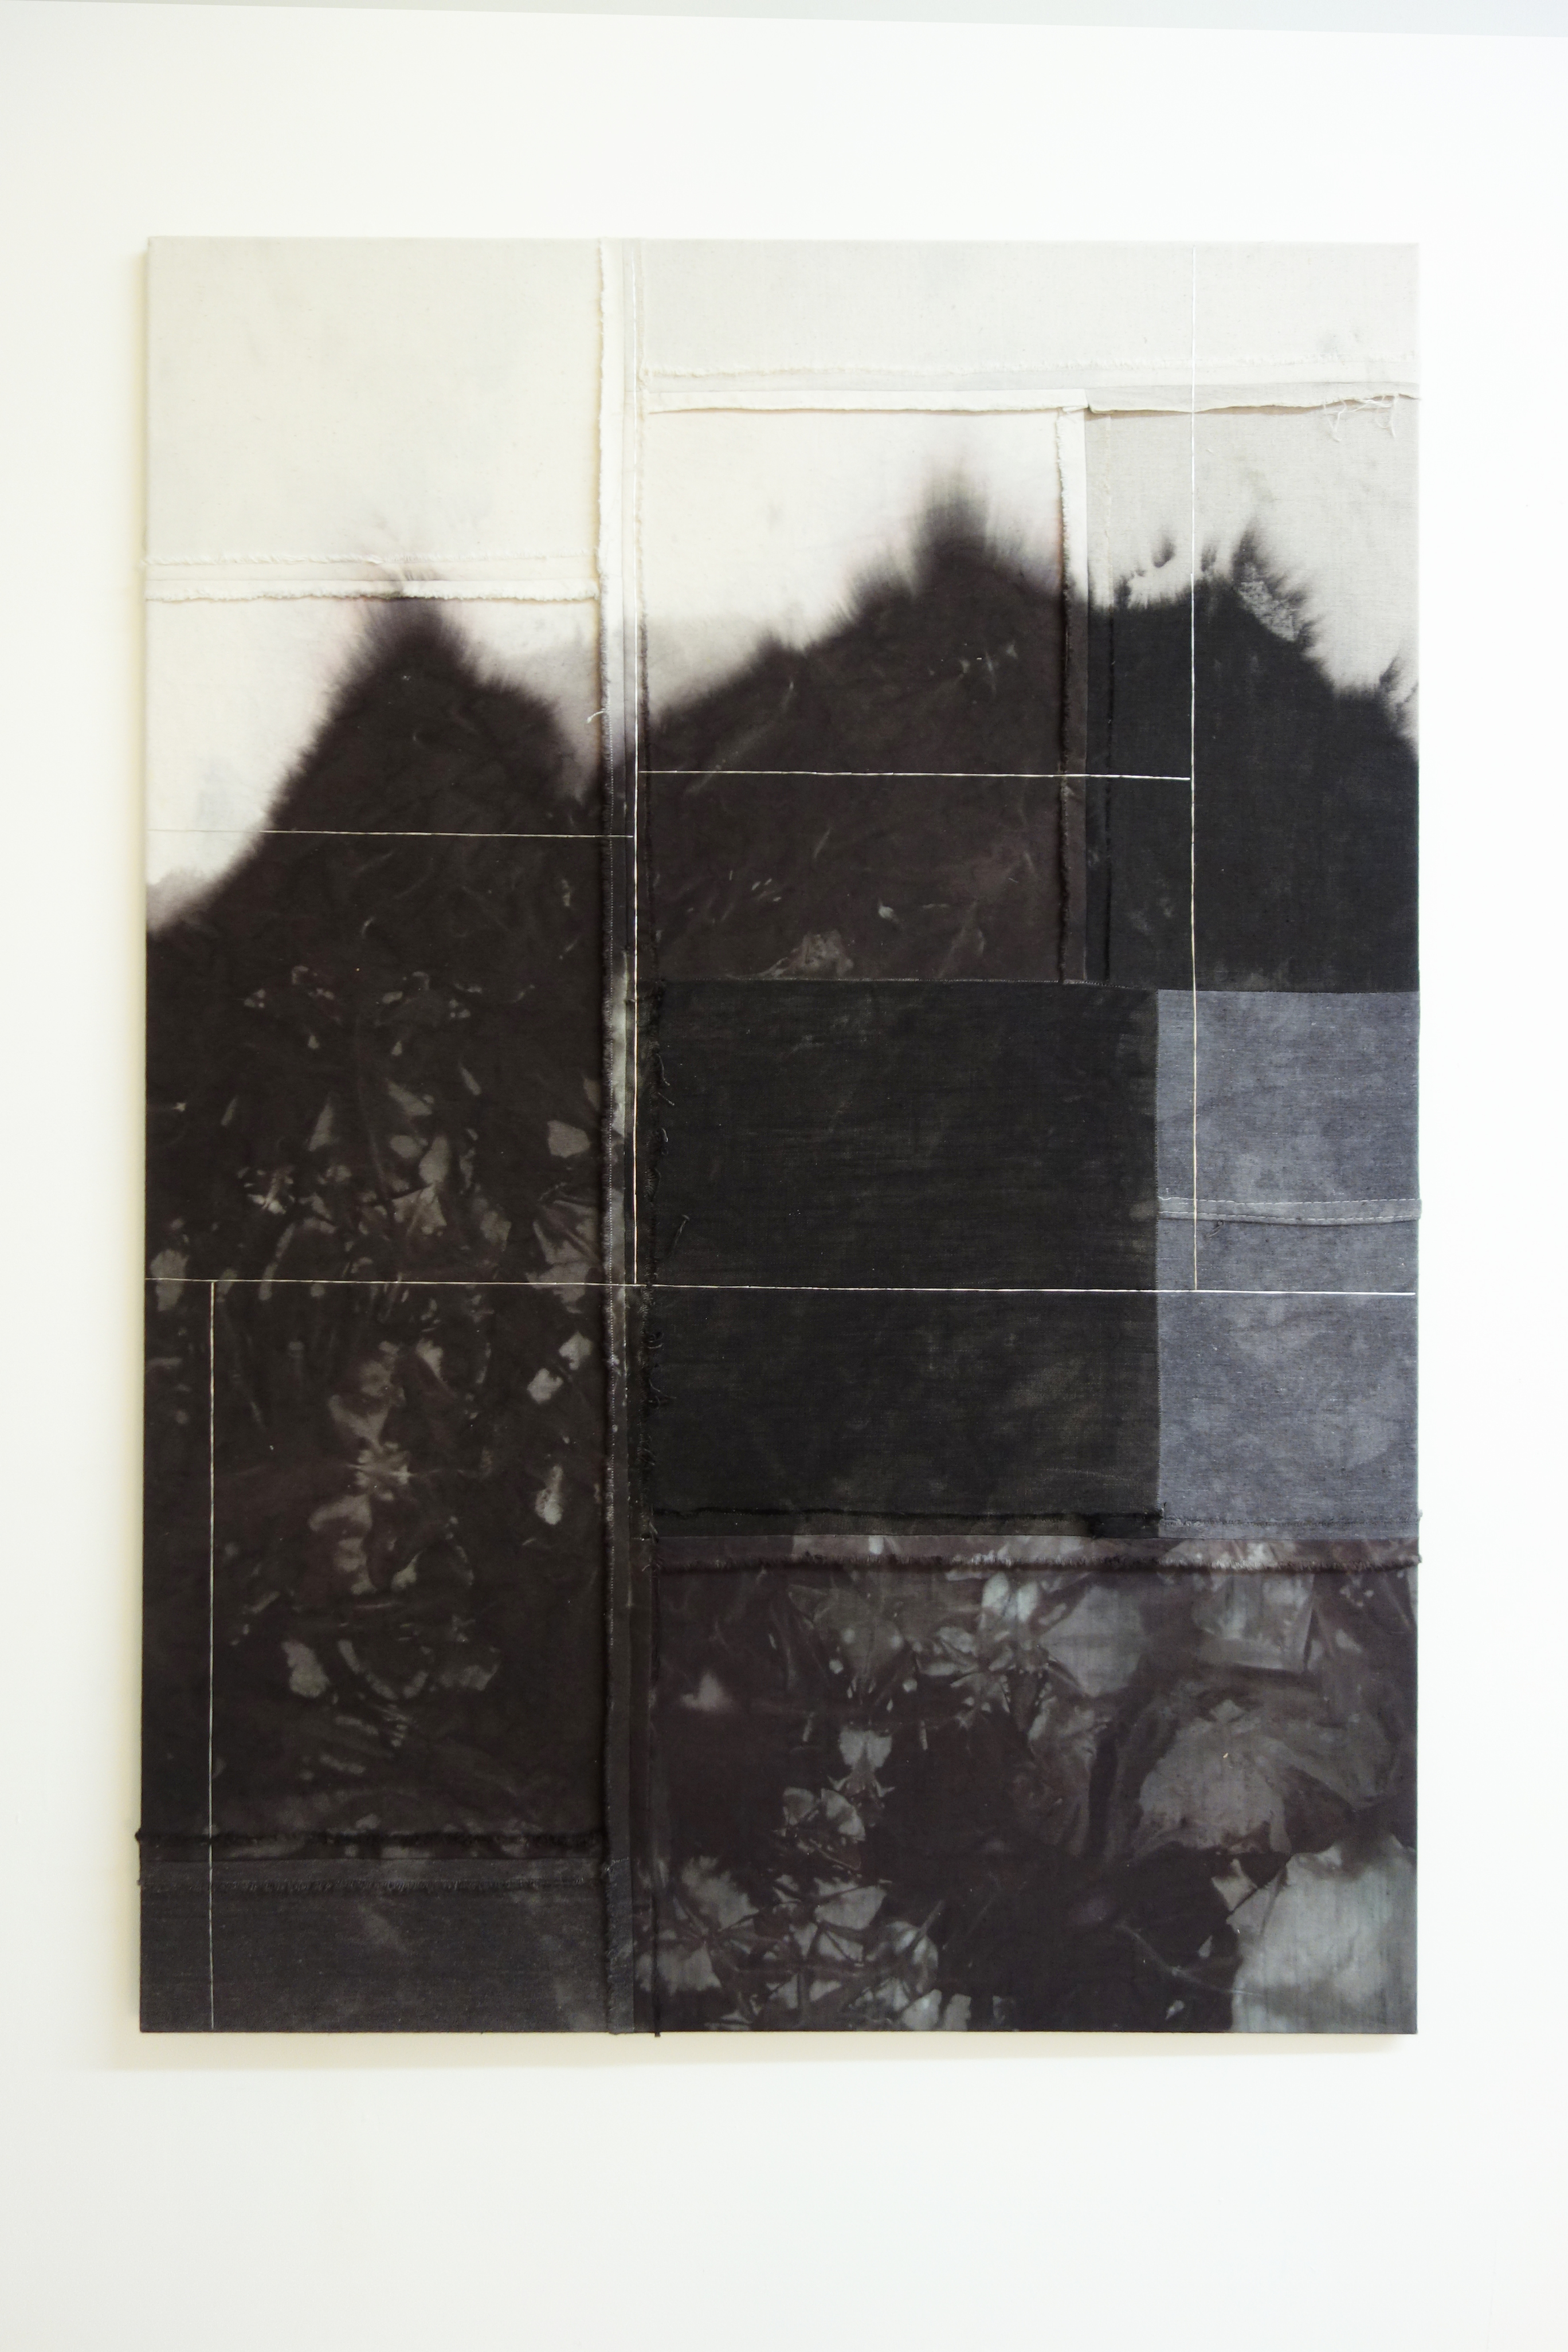 Alexander Wolff, Untitled, 2011, 48″ x 33″, fabric dyes and yarn on drop cloth, canvas, linen. Image courtesy of the Et al.